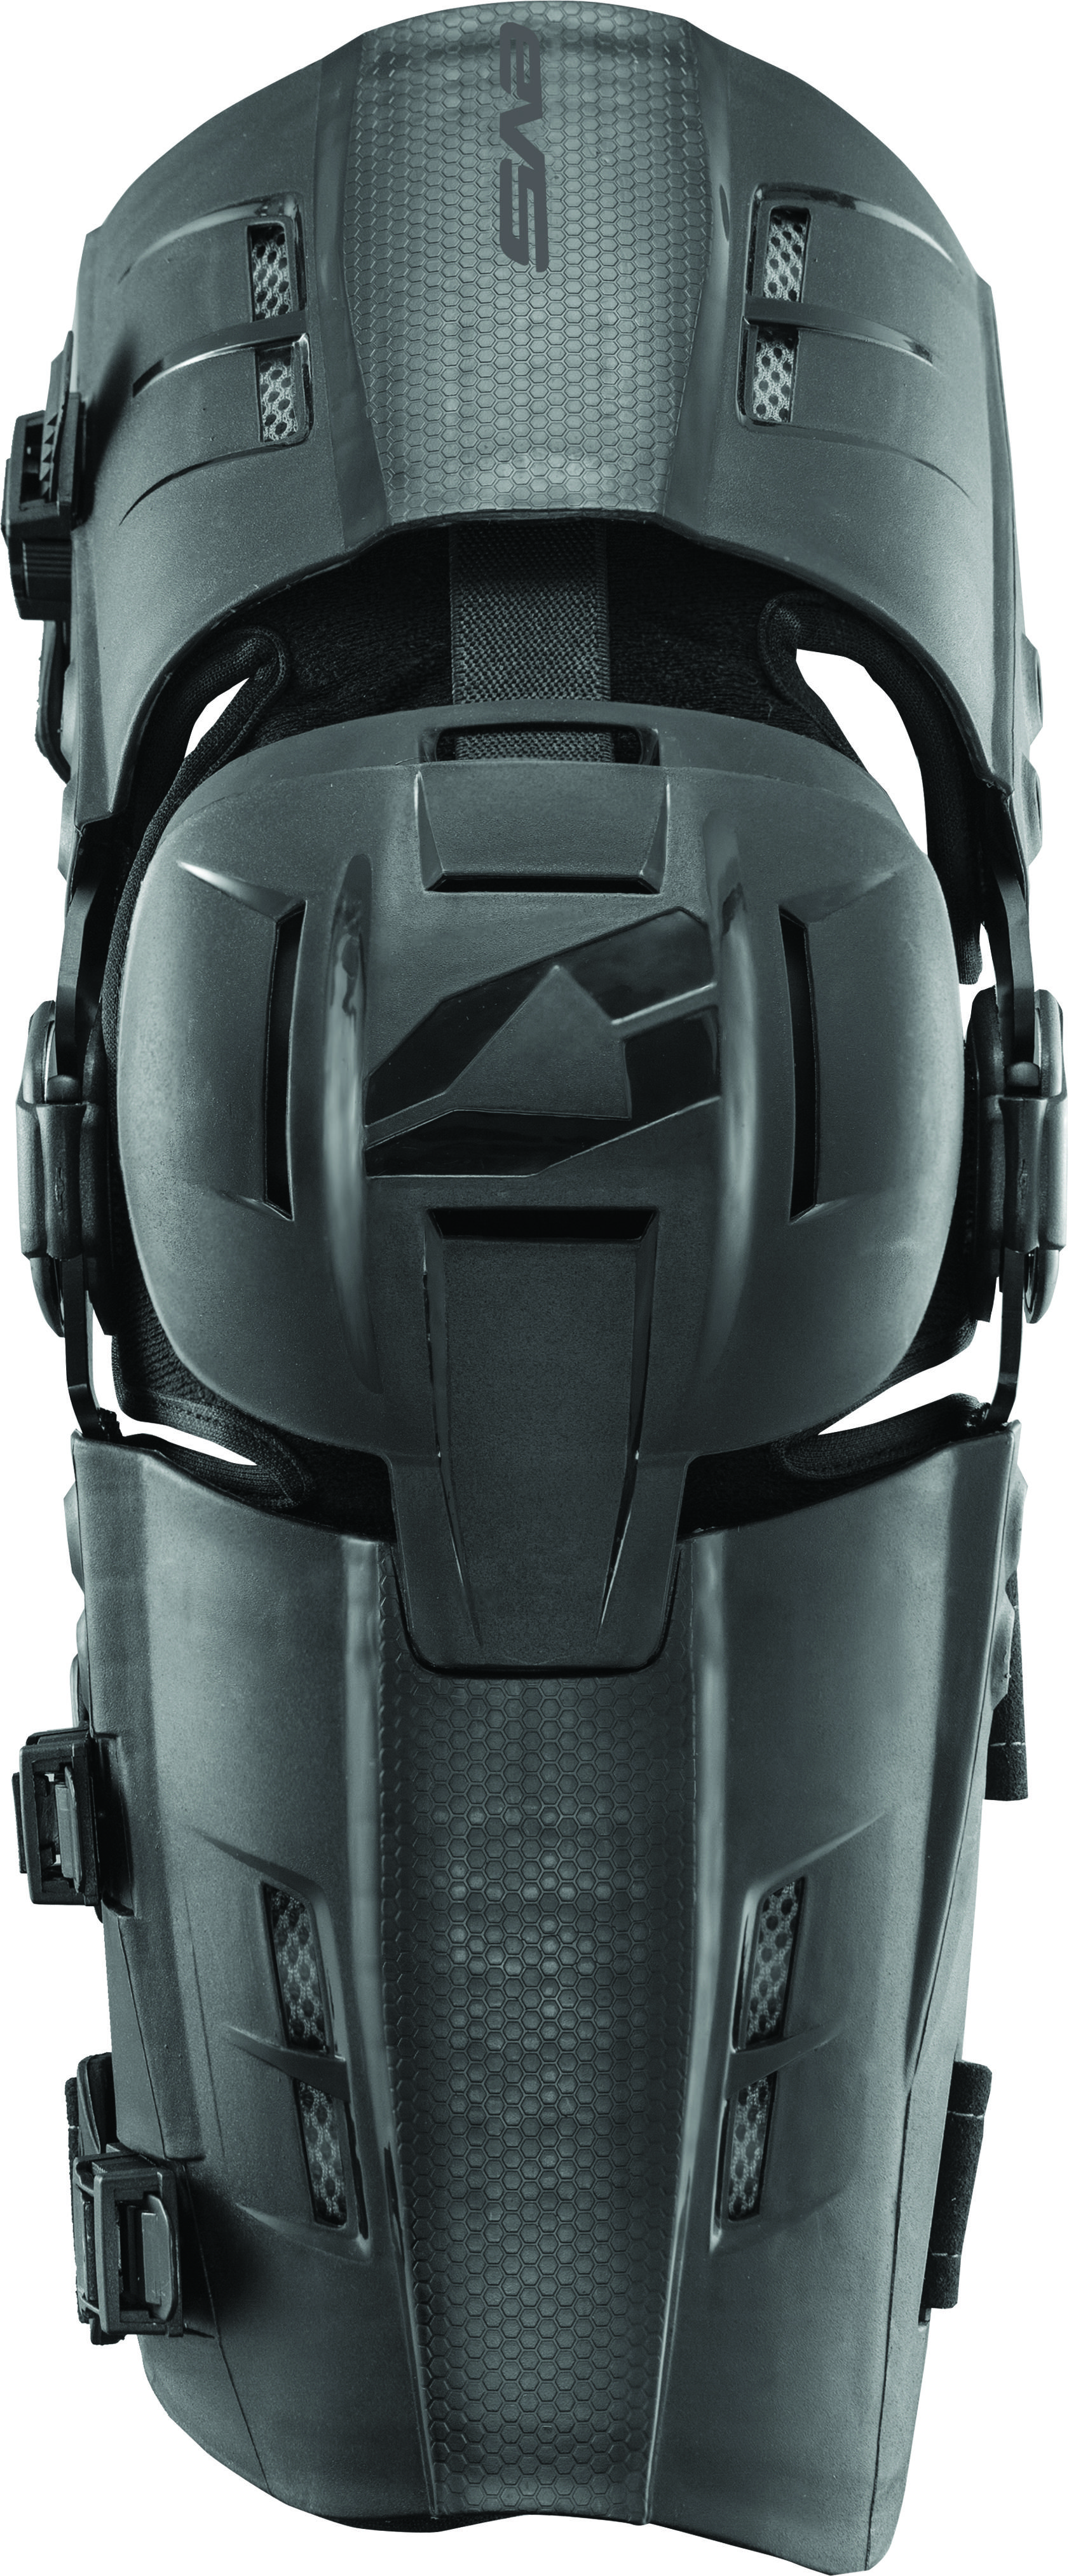 Rs9 Knee Braces - Small - Click Image to Close